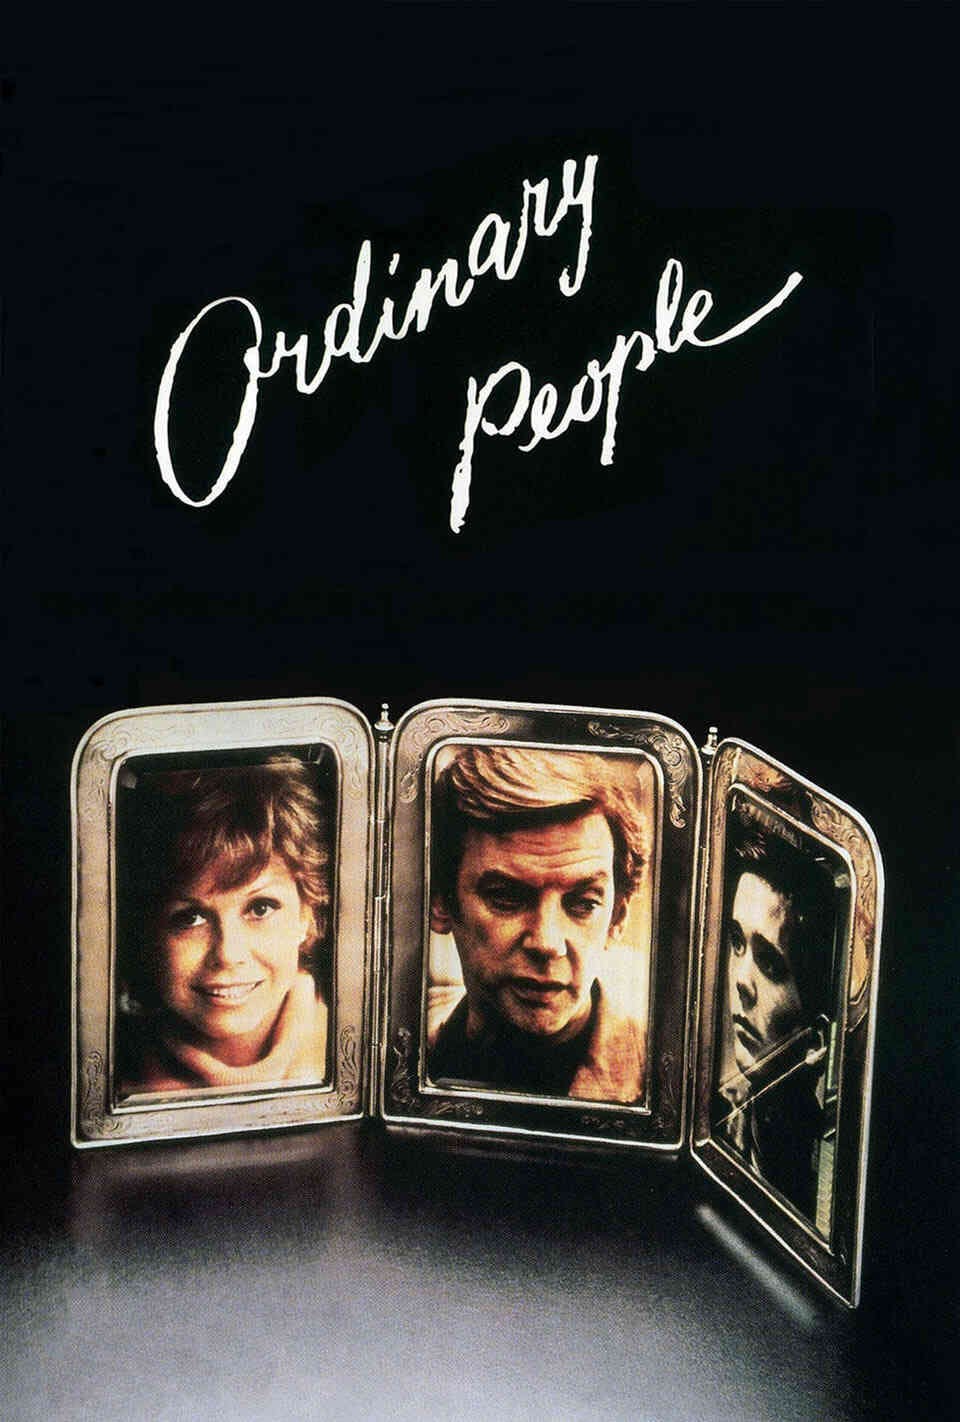 Read Ordinary People screenplay (poster)